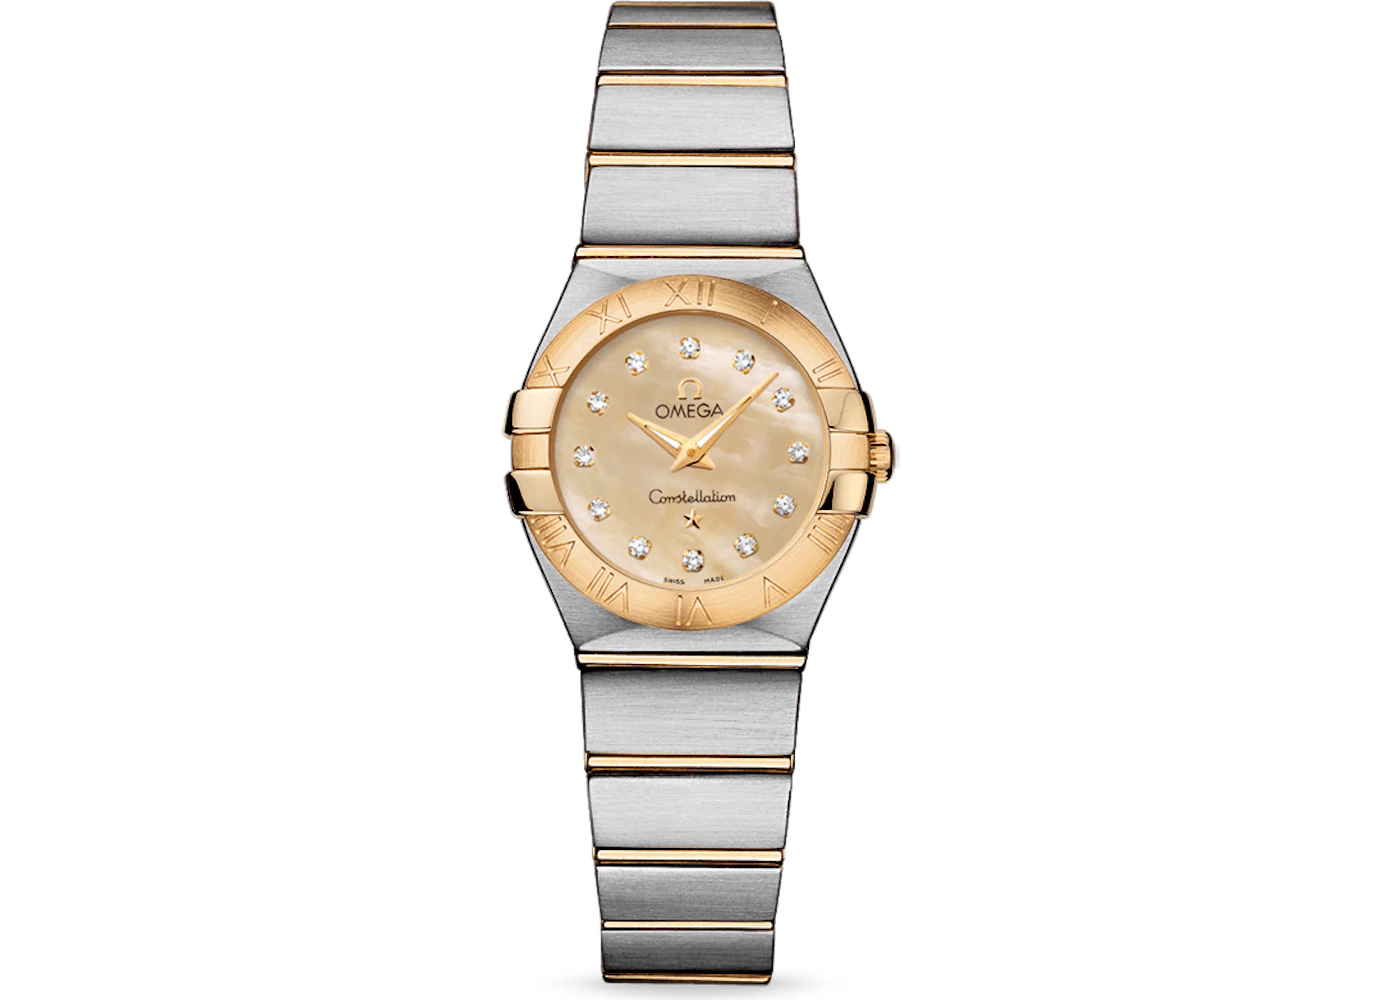 Omega Constellation 123.20.24.60.57.001 24mm in Steel/Yellow Gold - GB